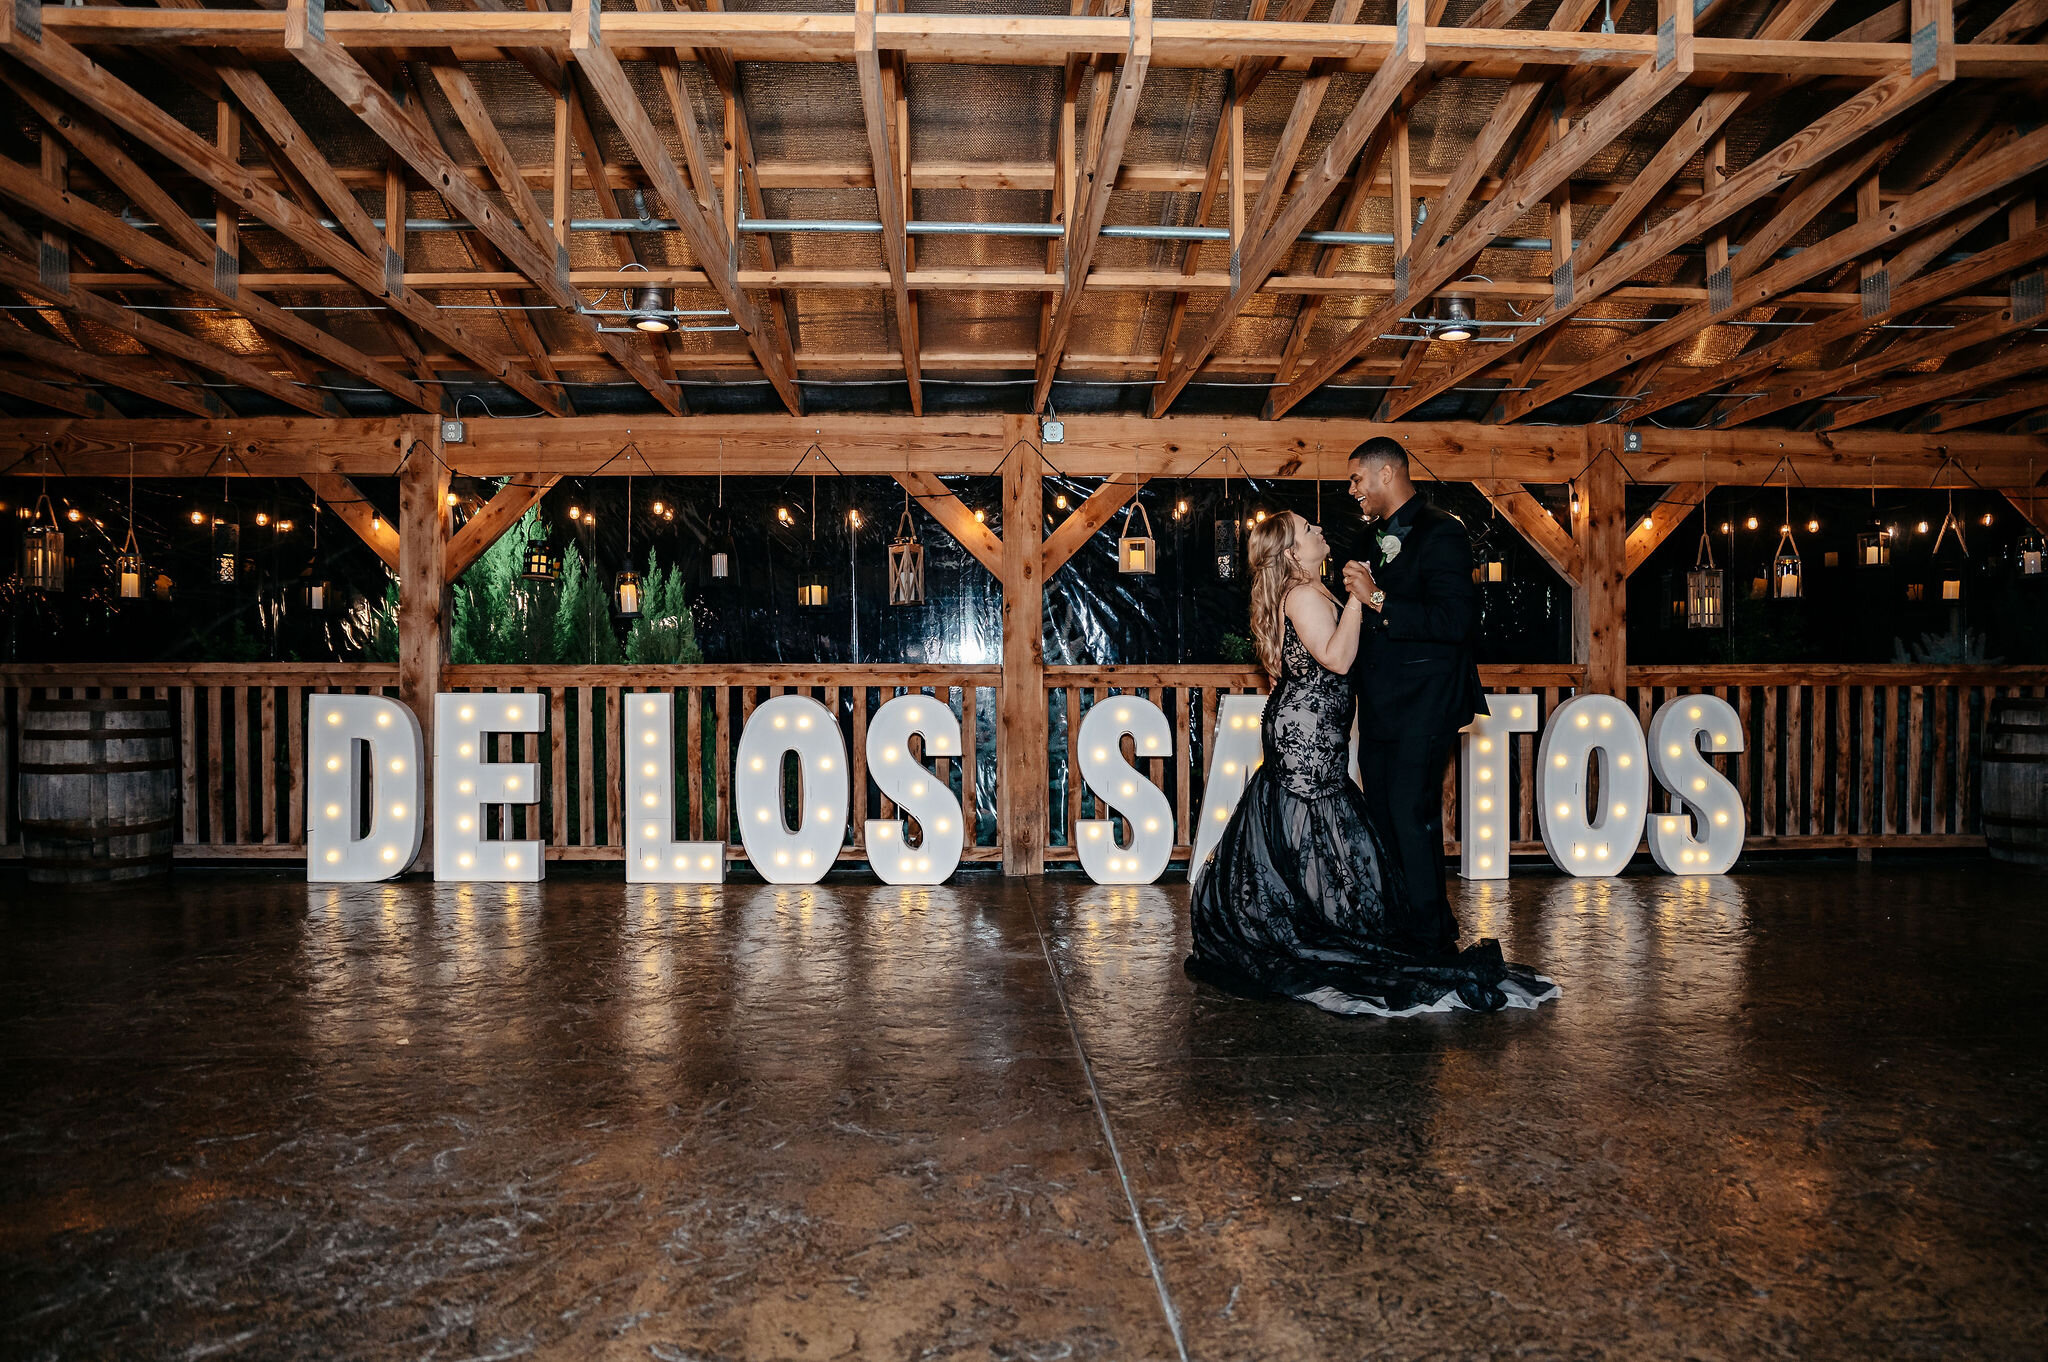 💖✨ Twirling into forever.✨💖 Check out this gorgeous couple sharing their first dance in a glow of love and marquee lights.😍

Dreaming of a dance floor that feels like home? Let's make your wedding day as heartwarming as your love story.🌟

Visit o